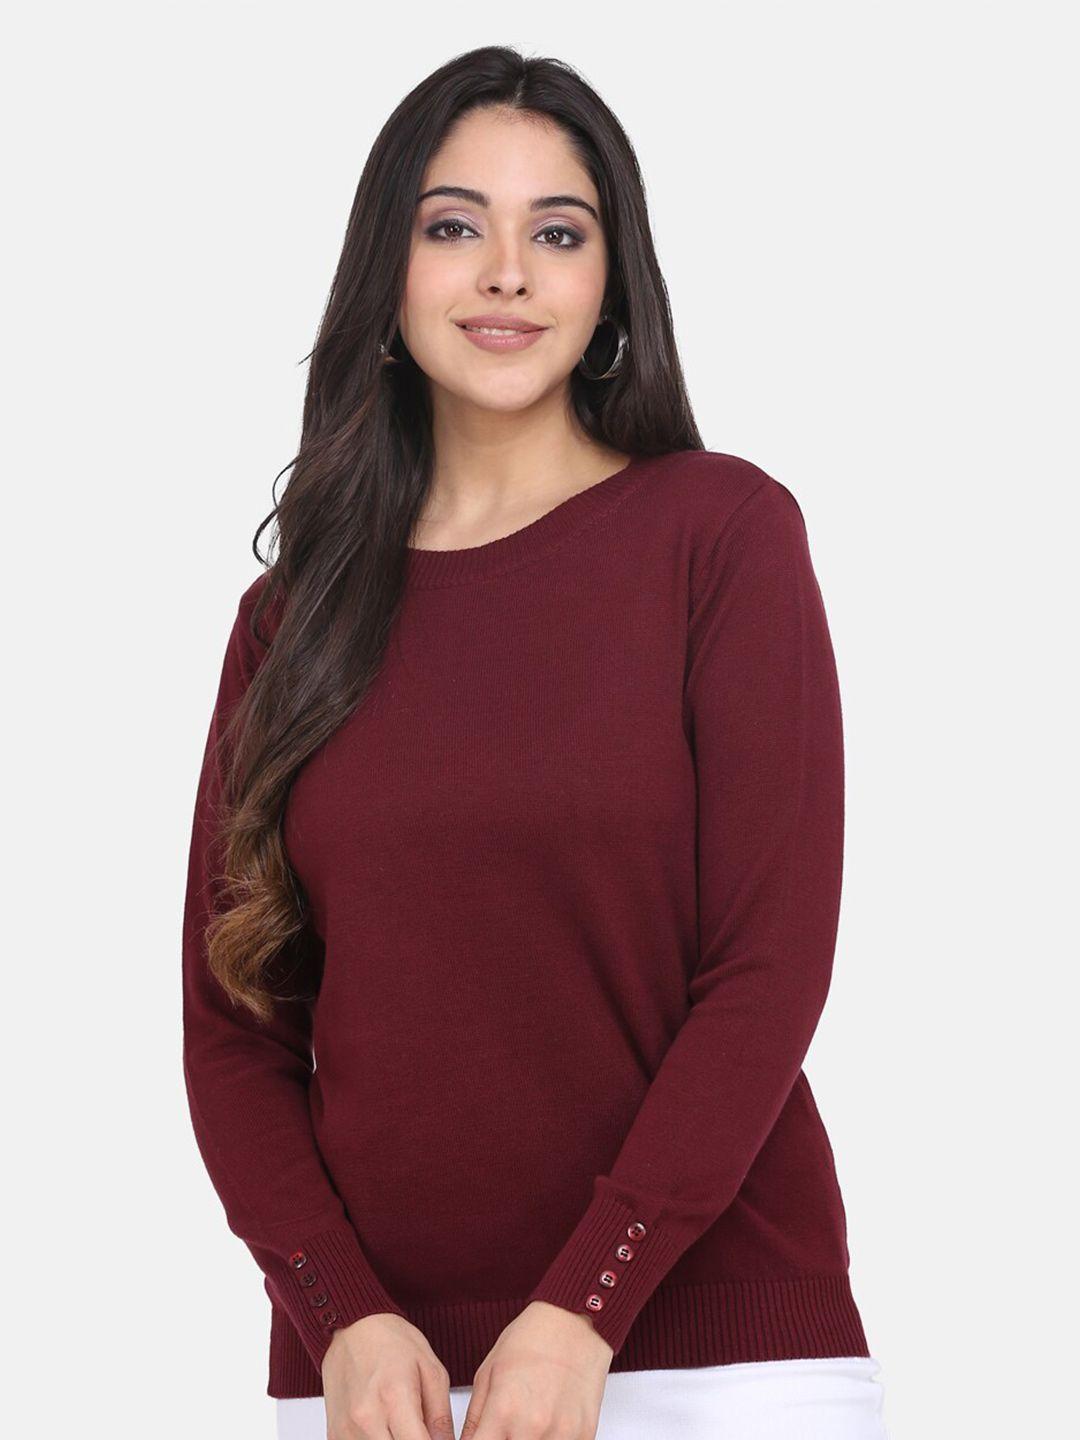 powersutra-women-red-casual-sweater